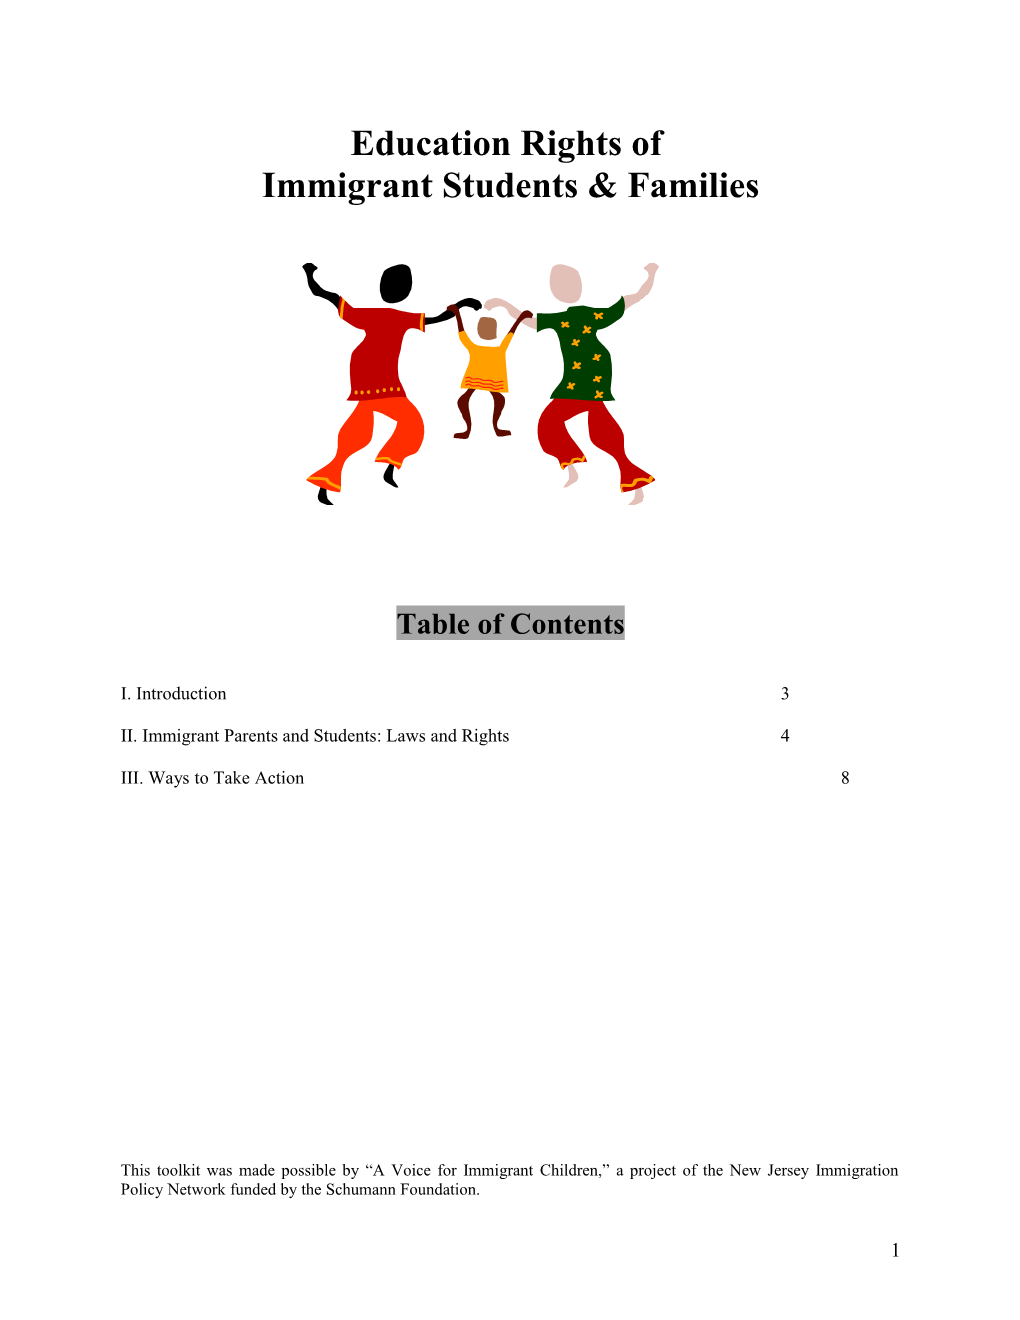 Ensuring Effective Services to Immigrant &/Or LEP/ELL Children & Families